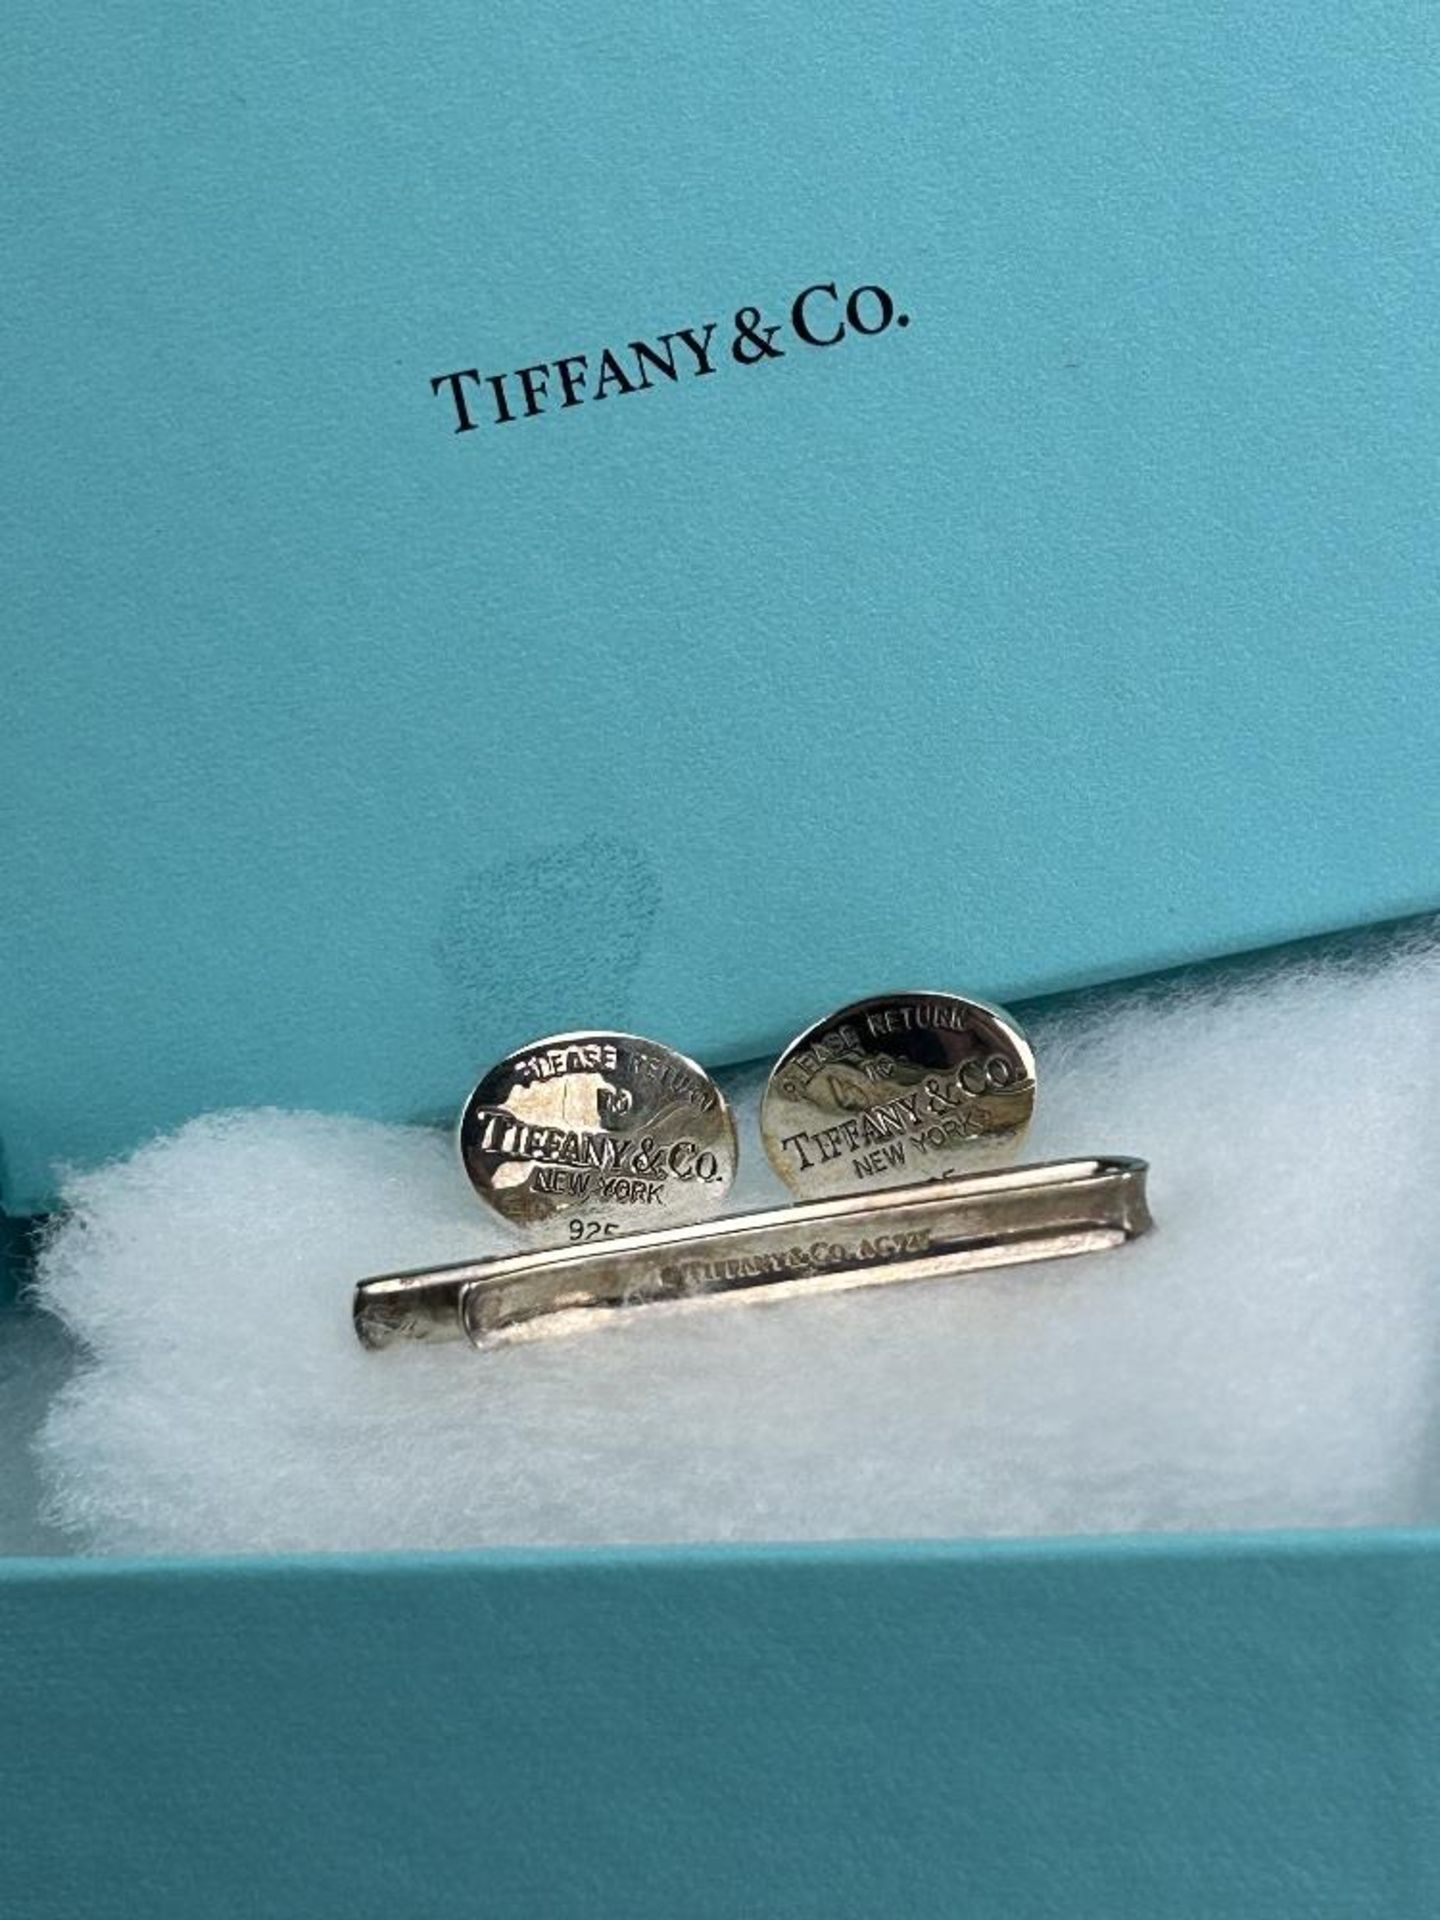 Tiffany & Co 925 Silver Cufflinks & Tie Pin Special Edition - Image 5 of 6